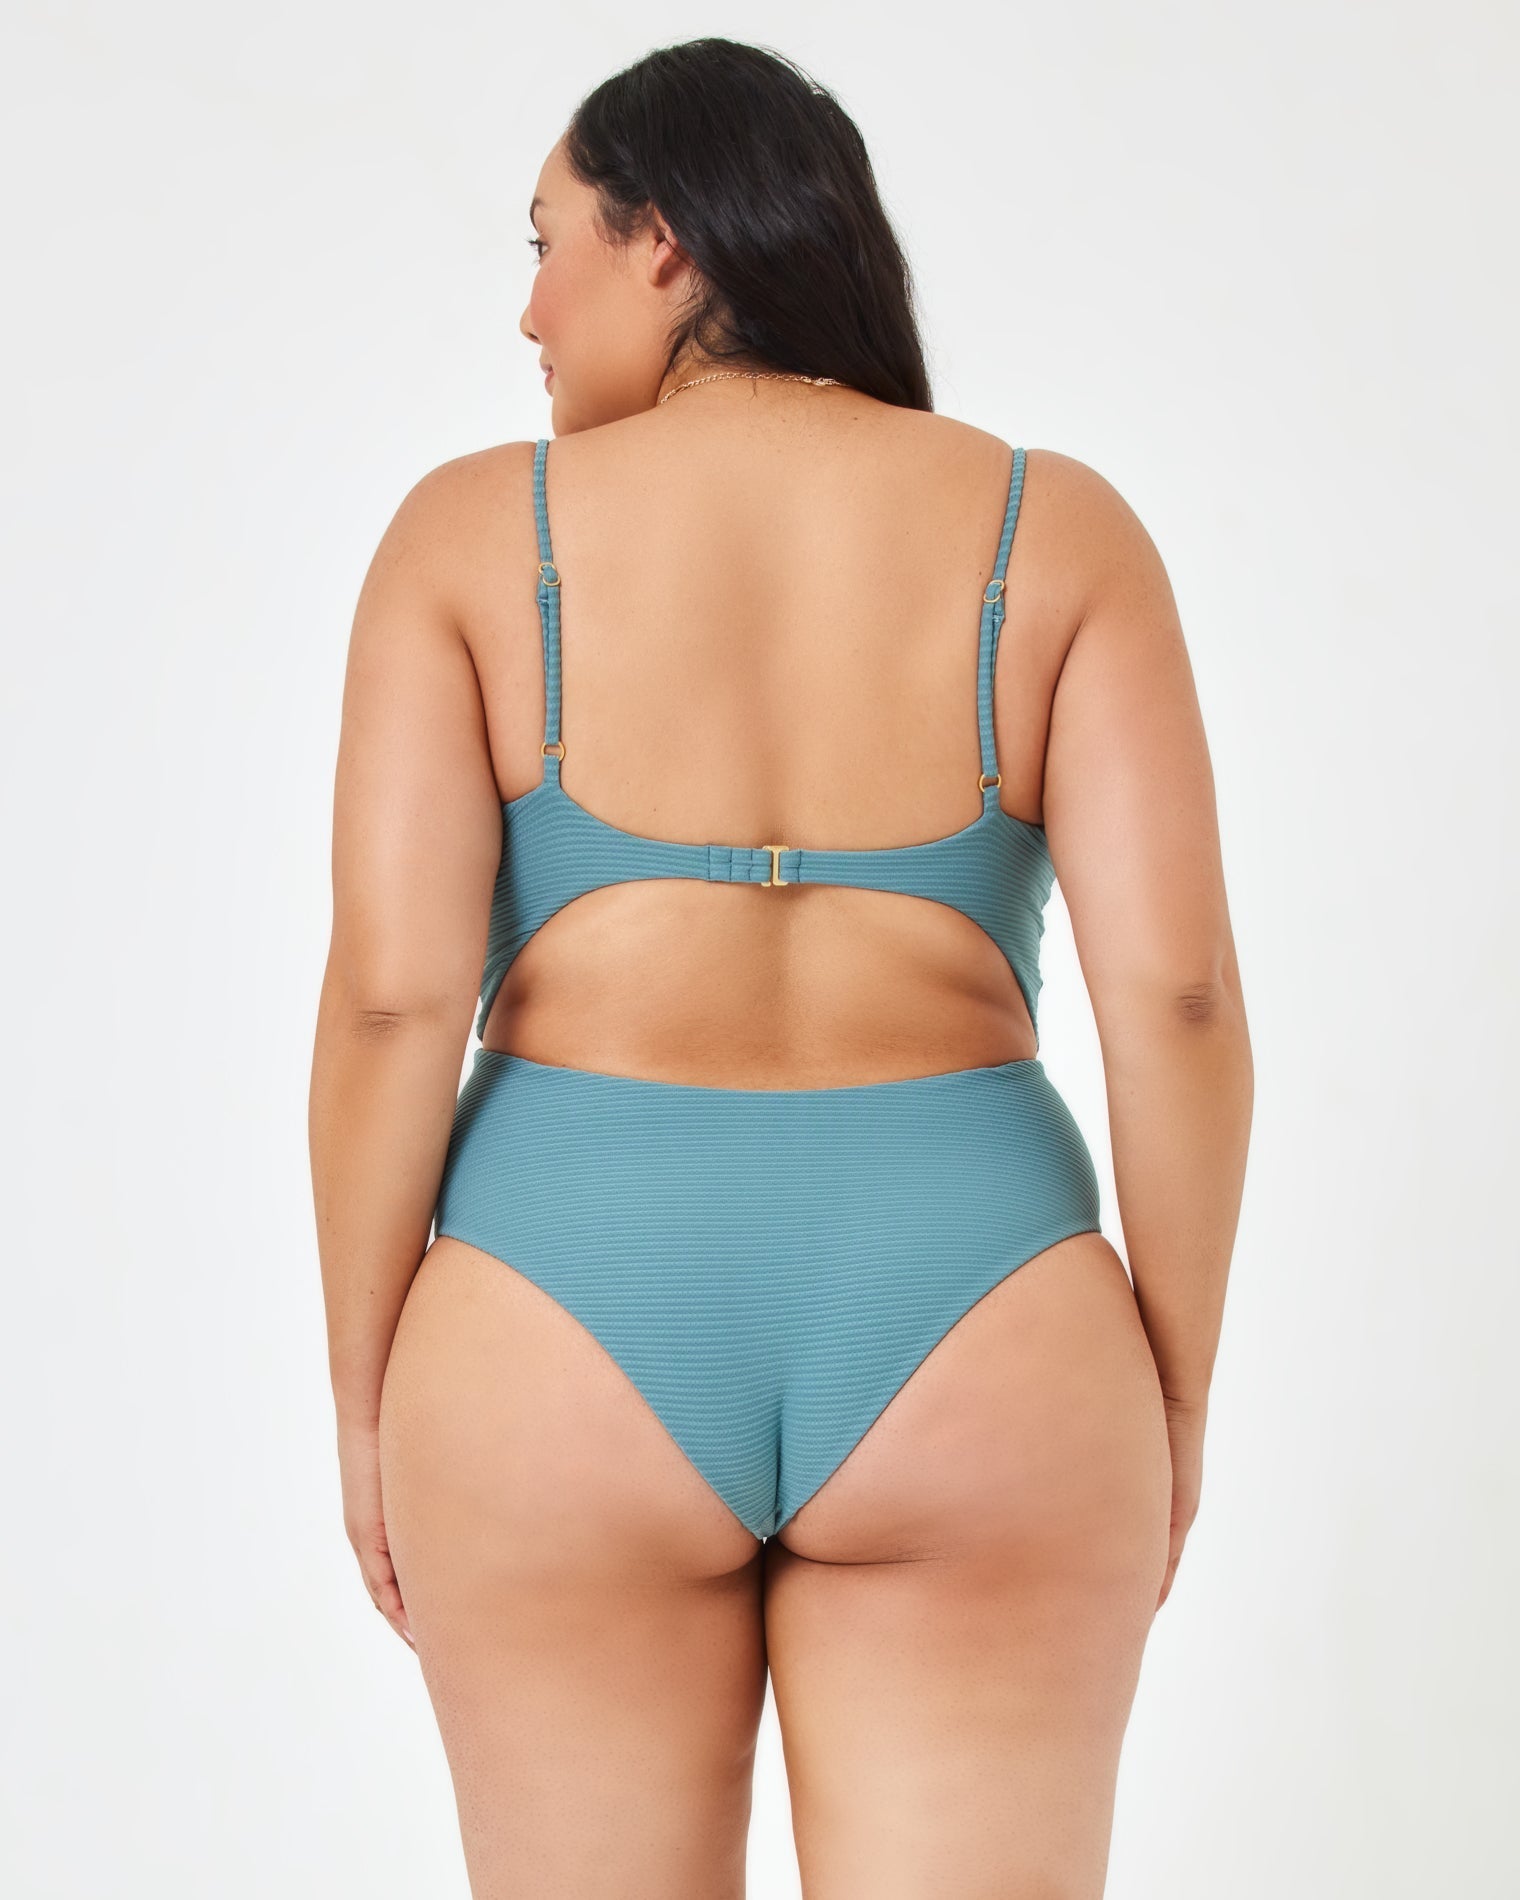 Eco Chic Repreve® Kyslee One Piece Swimsuit - Slated Glass Slated Glass | Model: Bianca (size: XL)